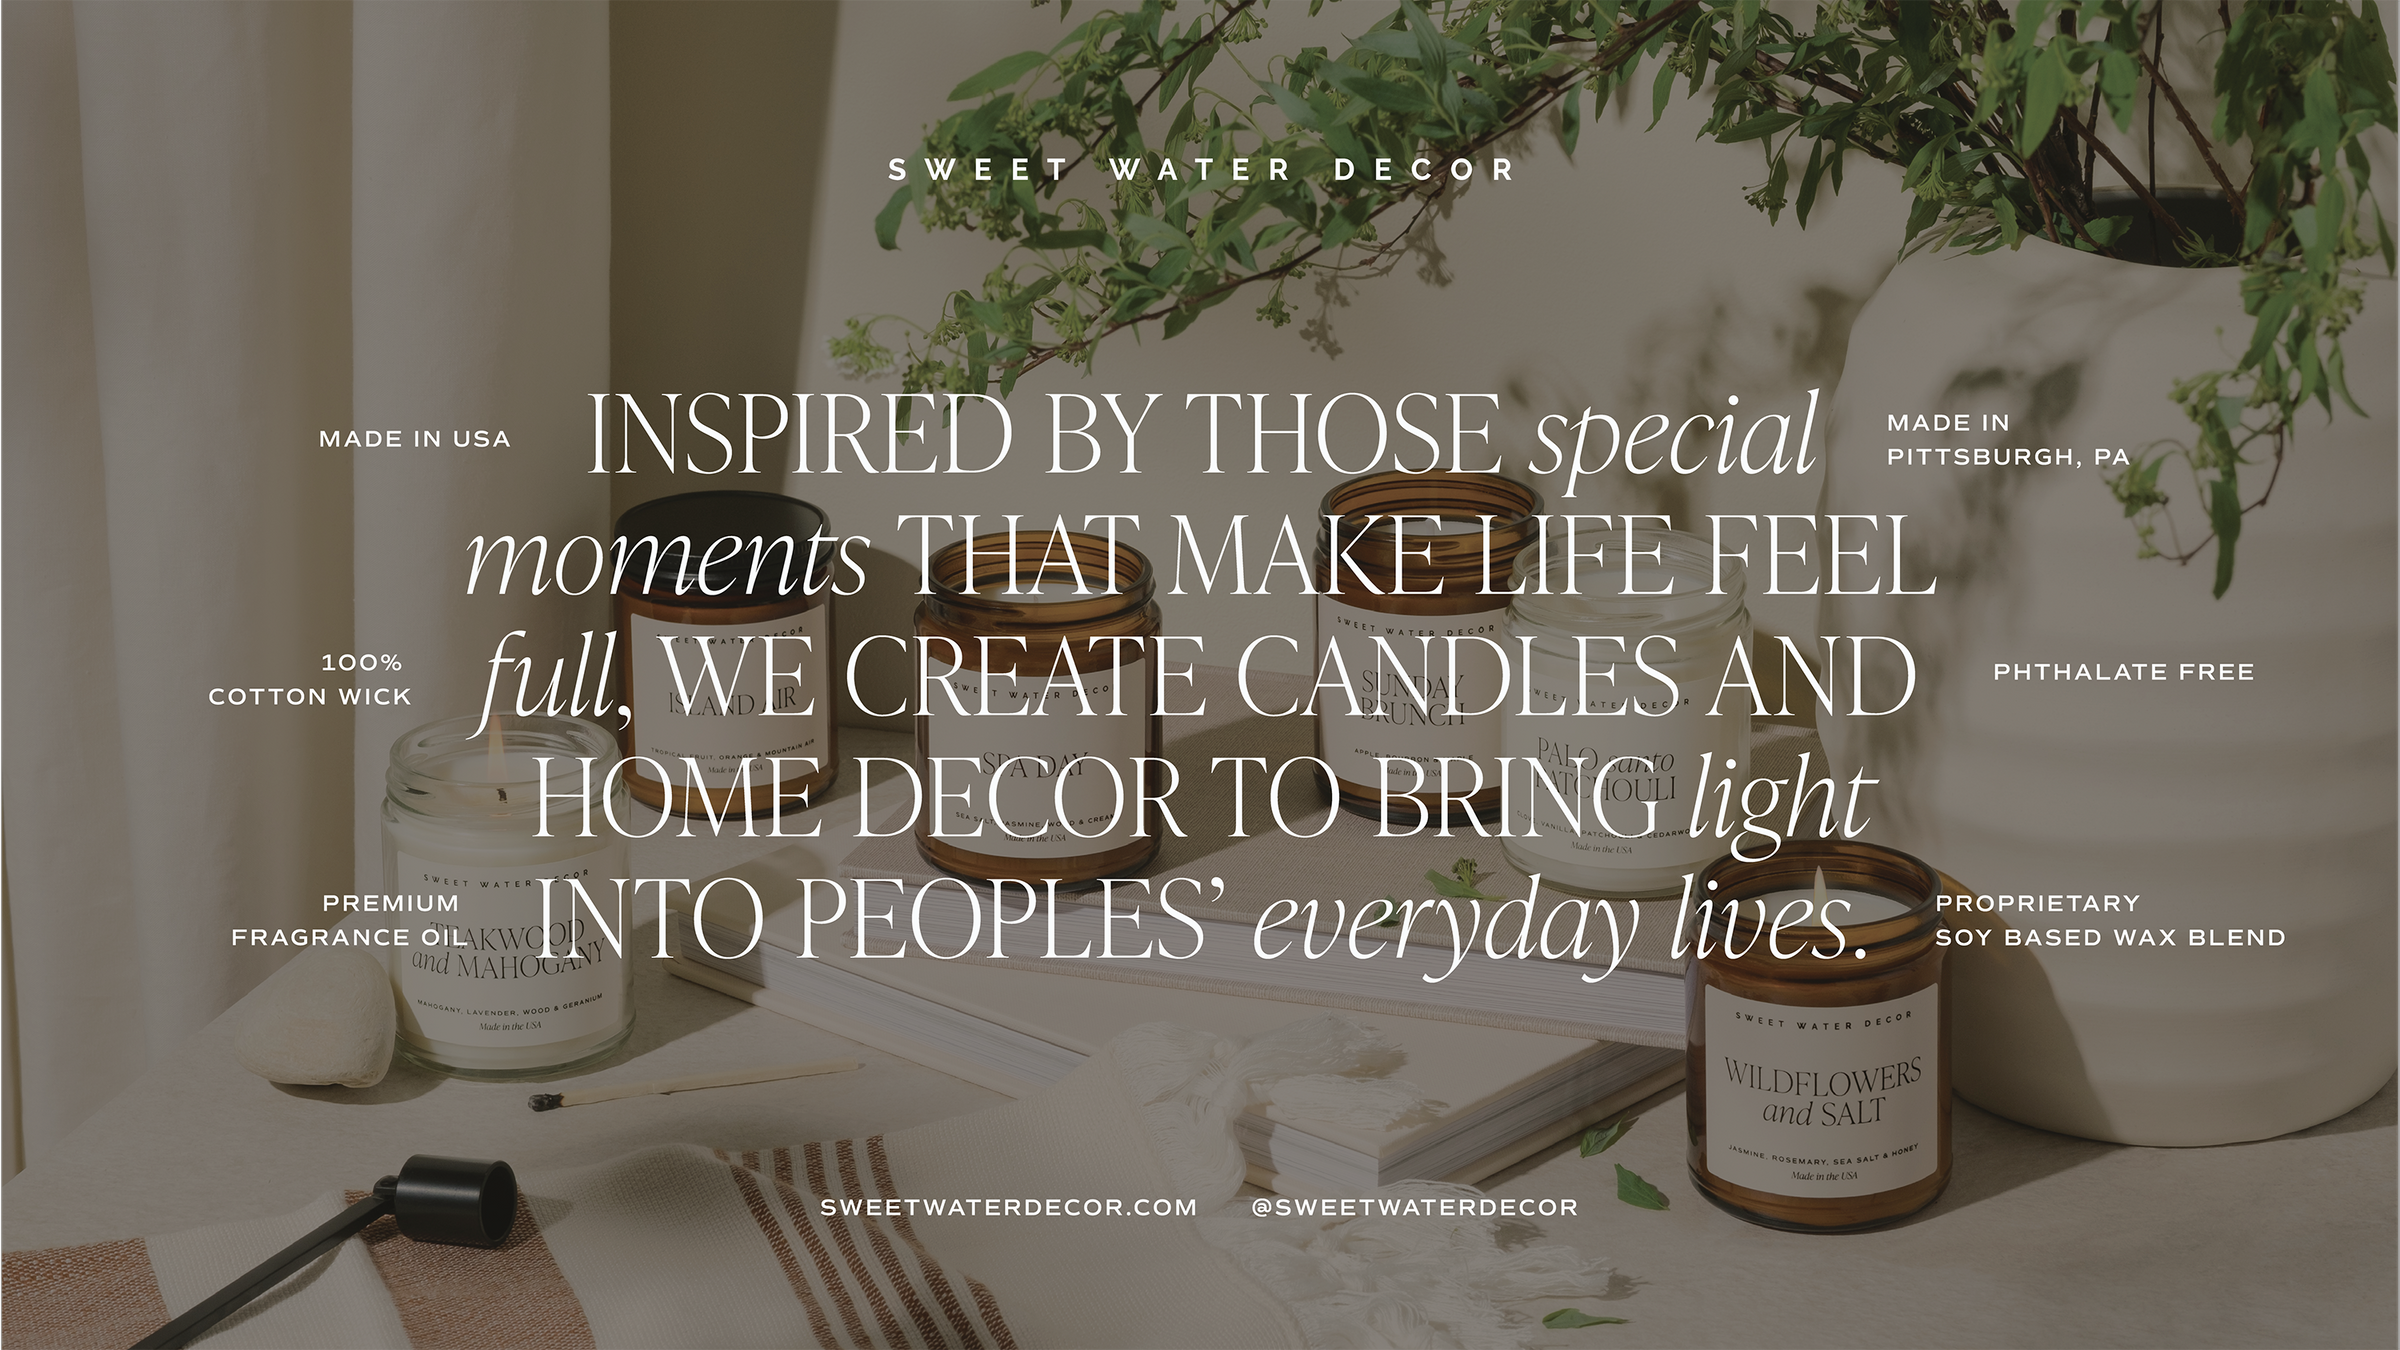 About Us – Sweet Water Decor